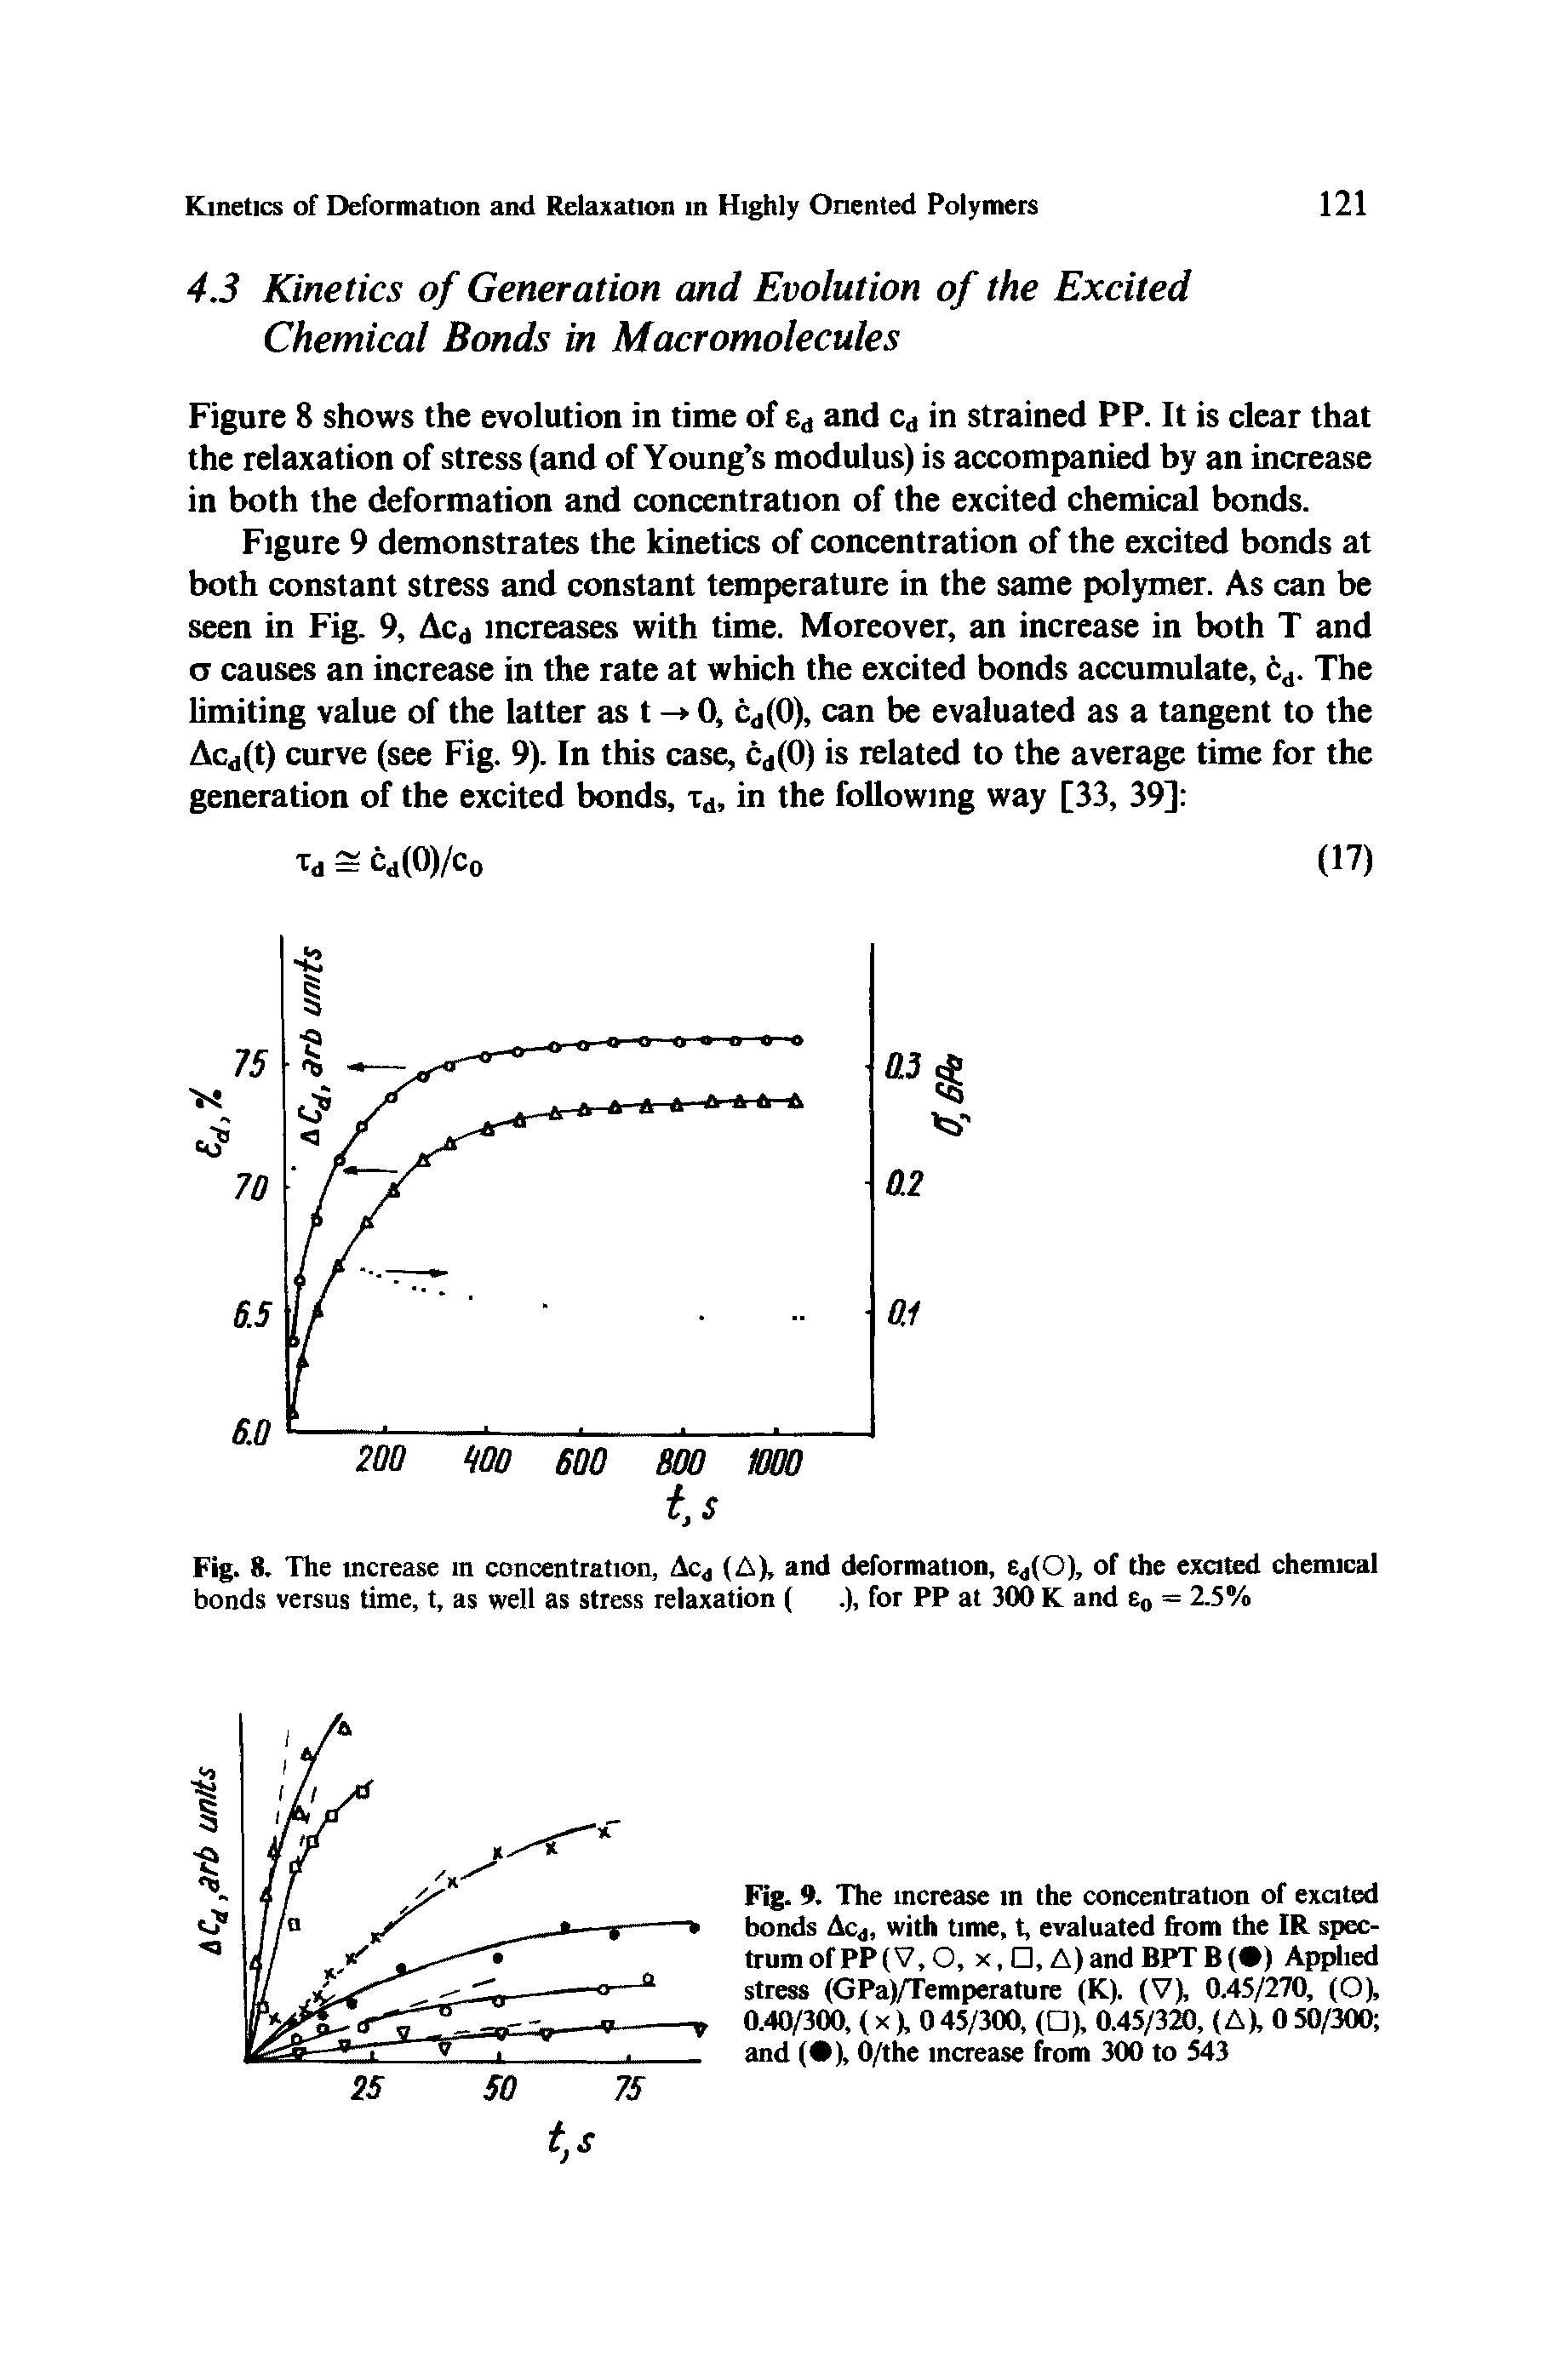 Fig. 8. The increase in concentration, Aca (A), and deformation, Ca(0), of the excited chemical bonds versus time, t, as well as stress relaxation (. ), for PP at 300 K and Eg = 2.5%...